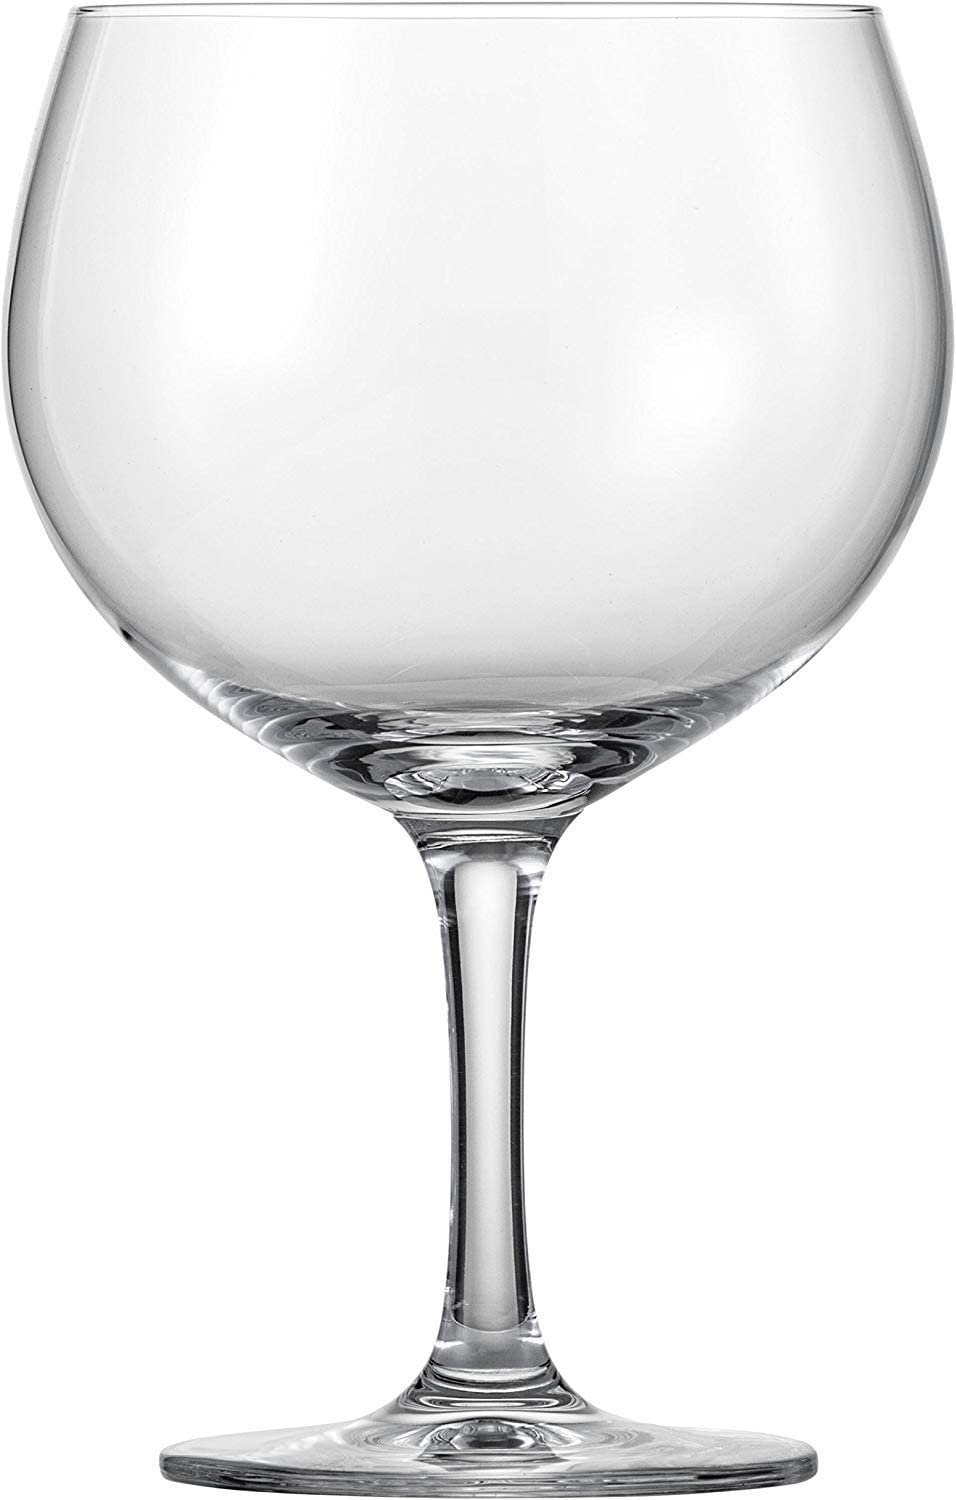 Schott Zwiesel Bar Specials Spanish Gin & Tonic Glasses 24oz / 696ml (Pack of 2)